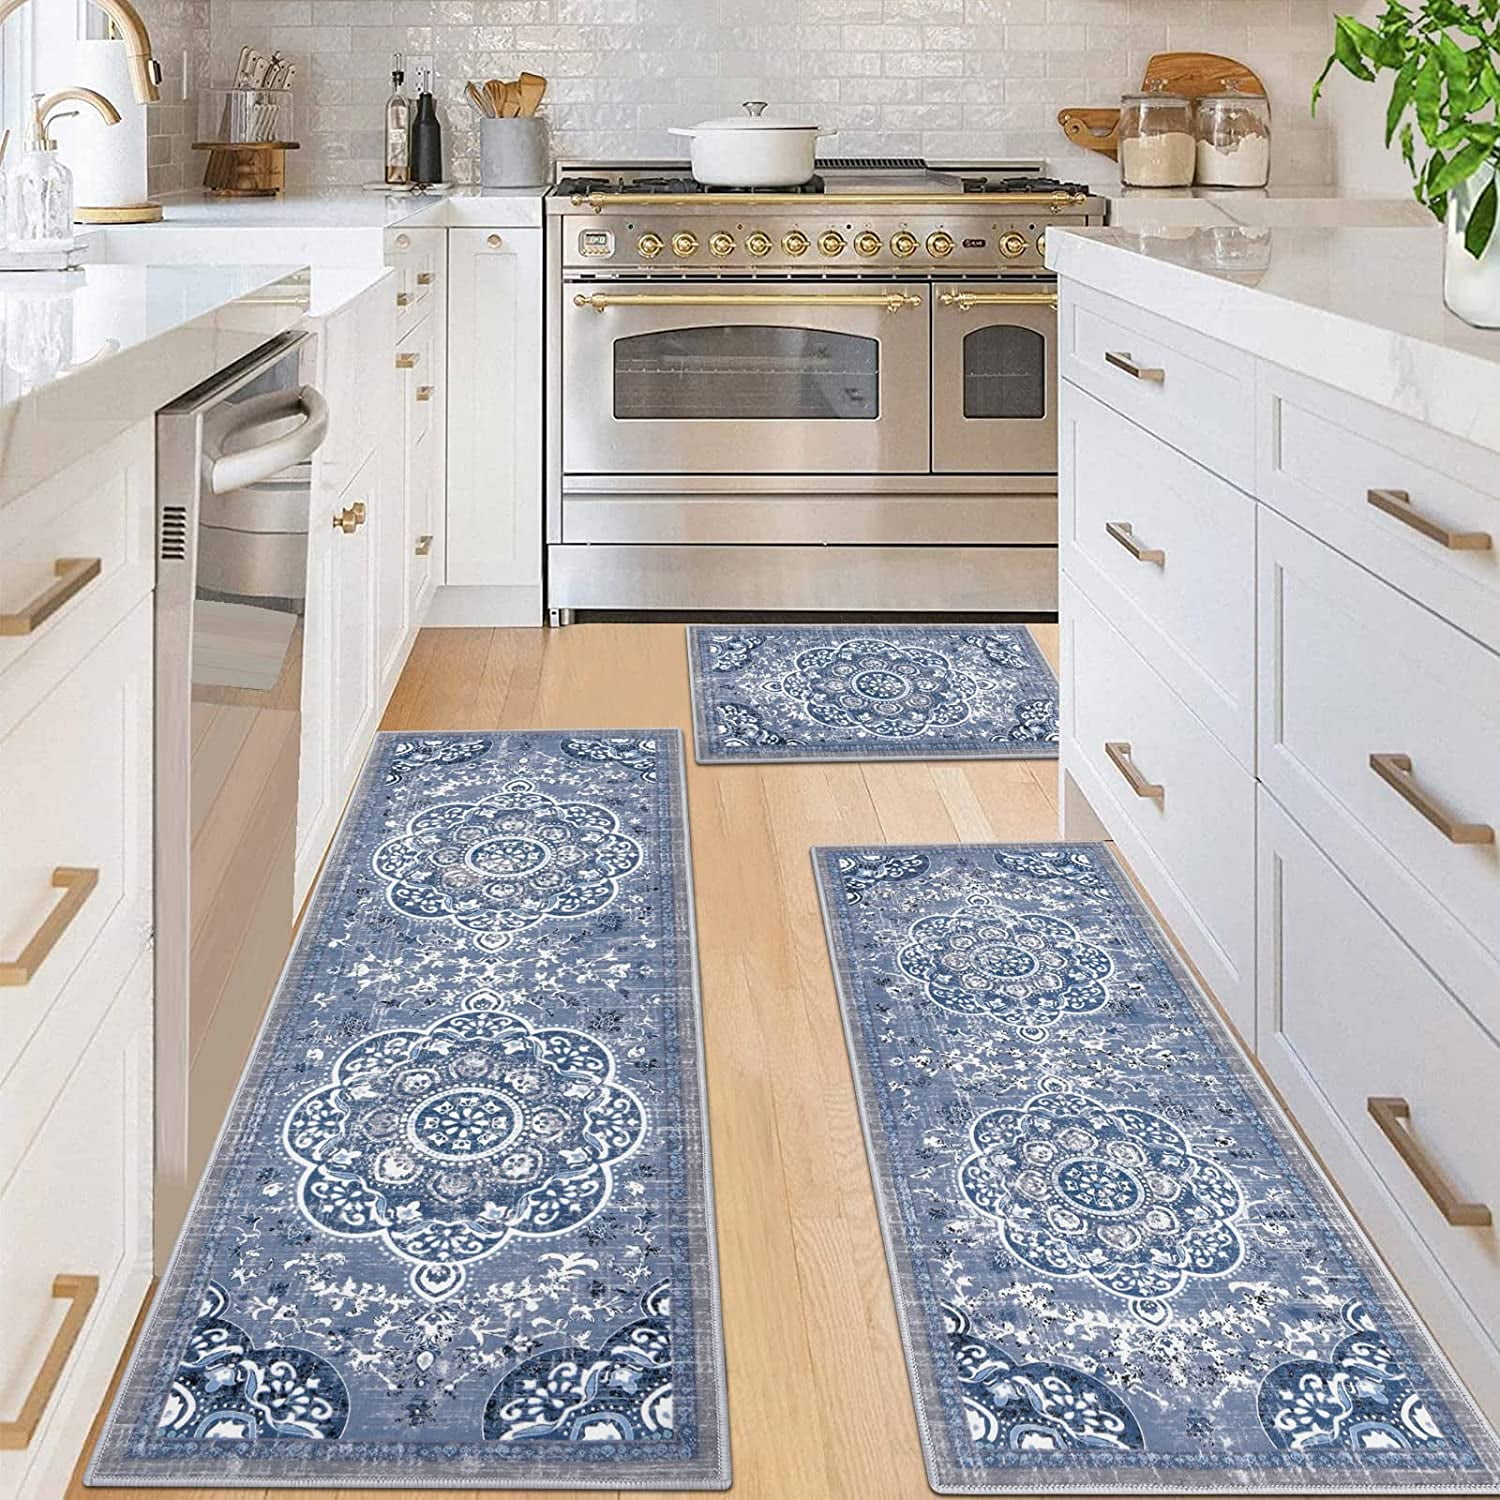 Ileading Boho Kitchen Rugs Sets 3 Piece With Runner Non Slip Kitchen Mats For Floor Washable Bohemian Runner Rug Set Of 3 Blue Gray B751a4b0 6241 4d43 Be15 Ab762ca7af36.efe6f9babdad9fc9d3d07a55594daa45 